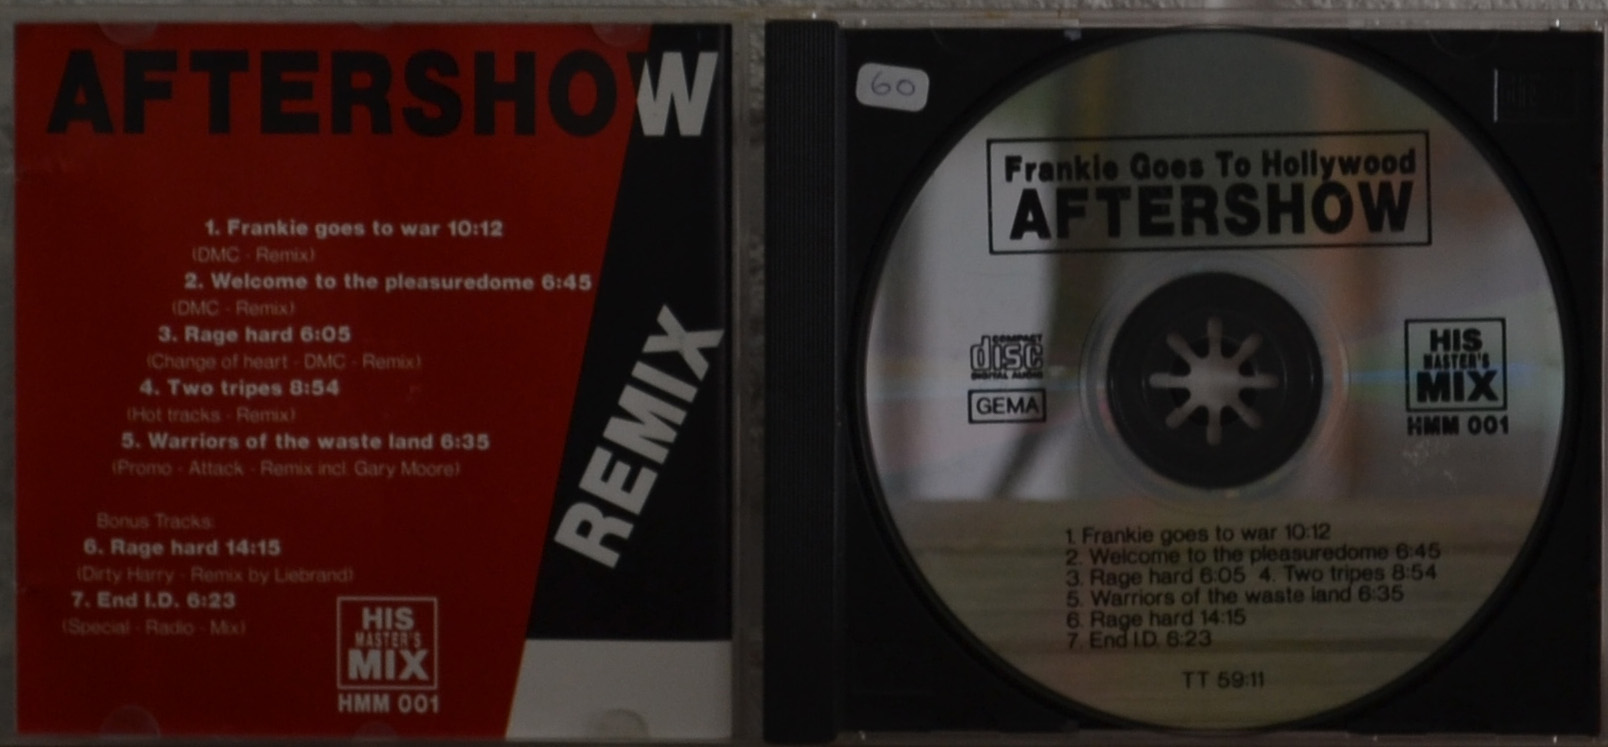 Aftershow bootleg CD